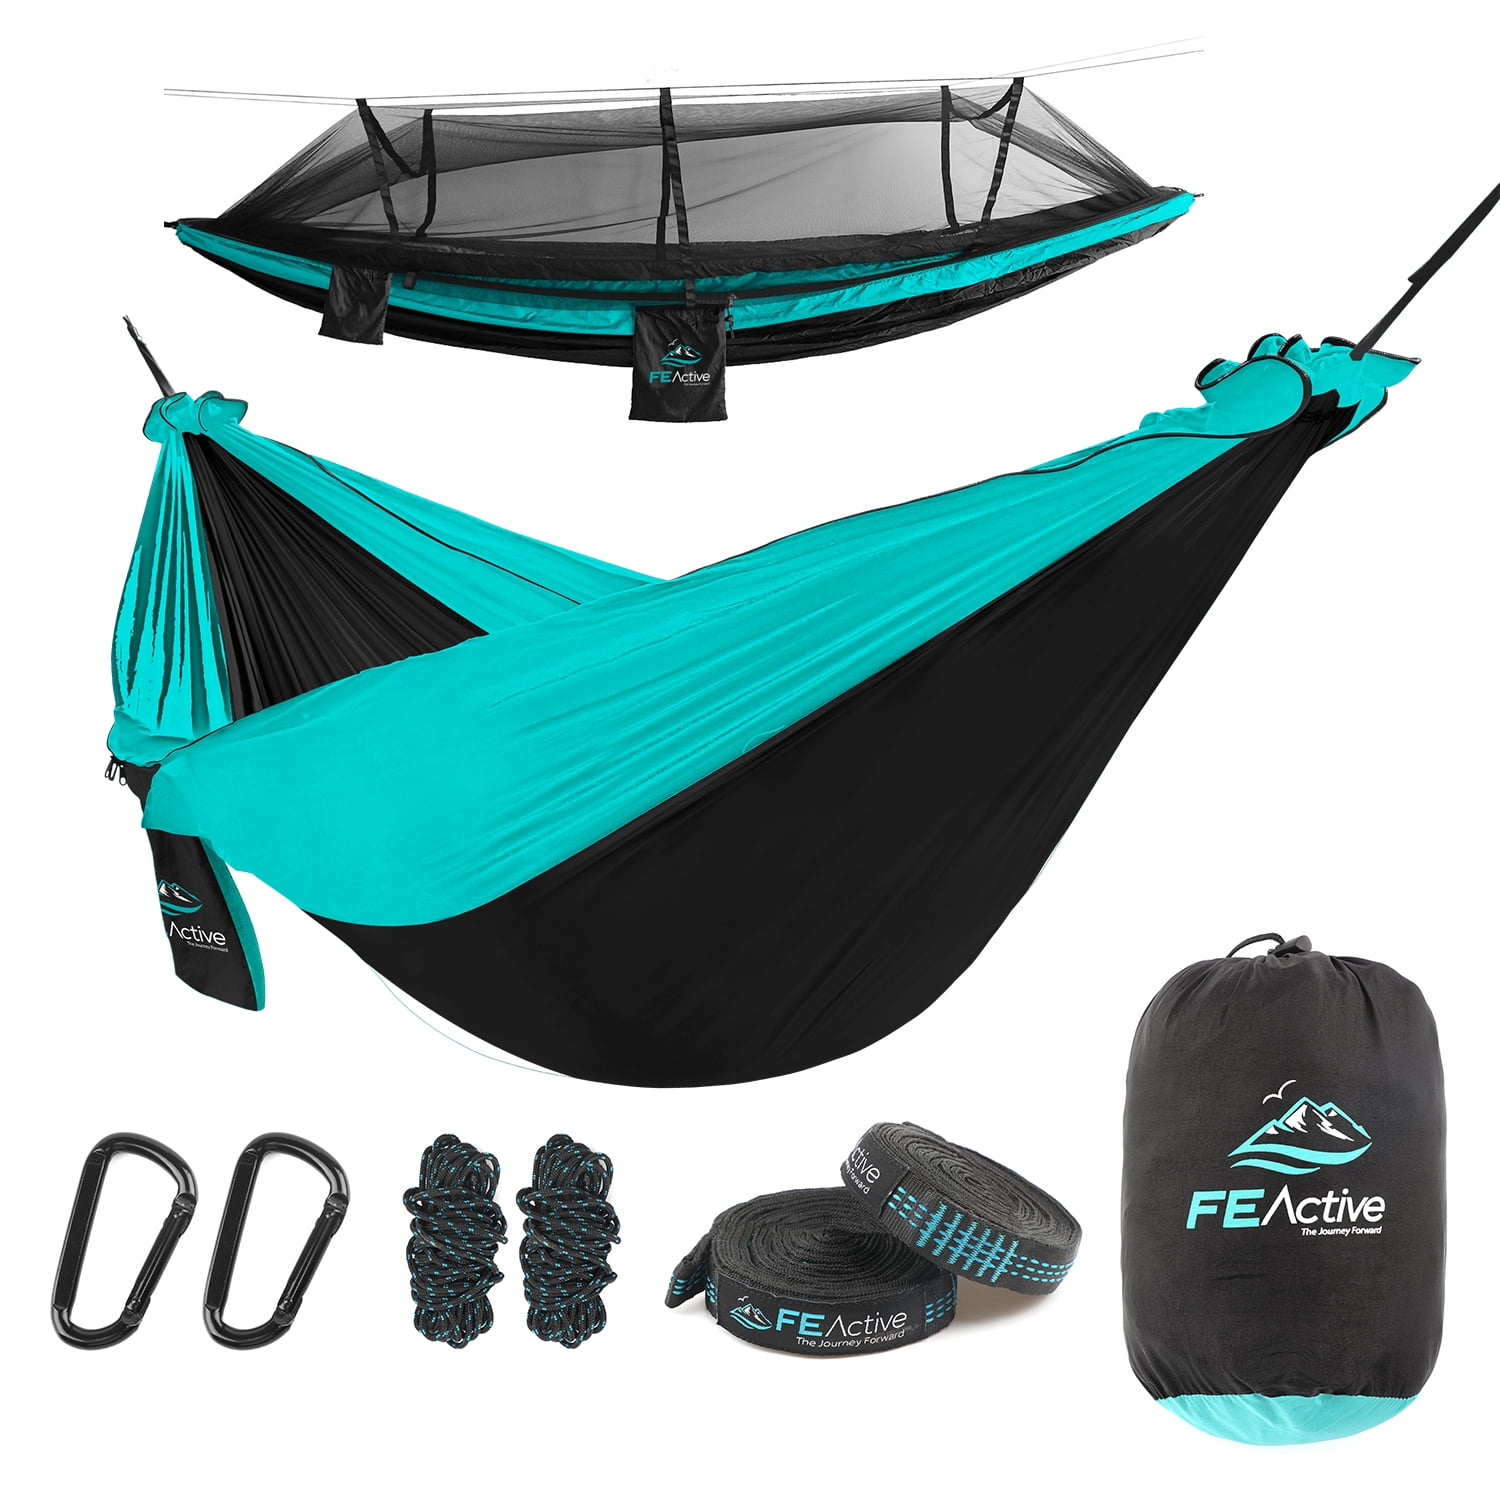 Outdoor Portable Camping Hammock Backpacking Hiking Lightweight fast free del UK 